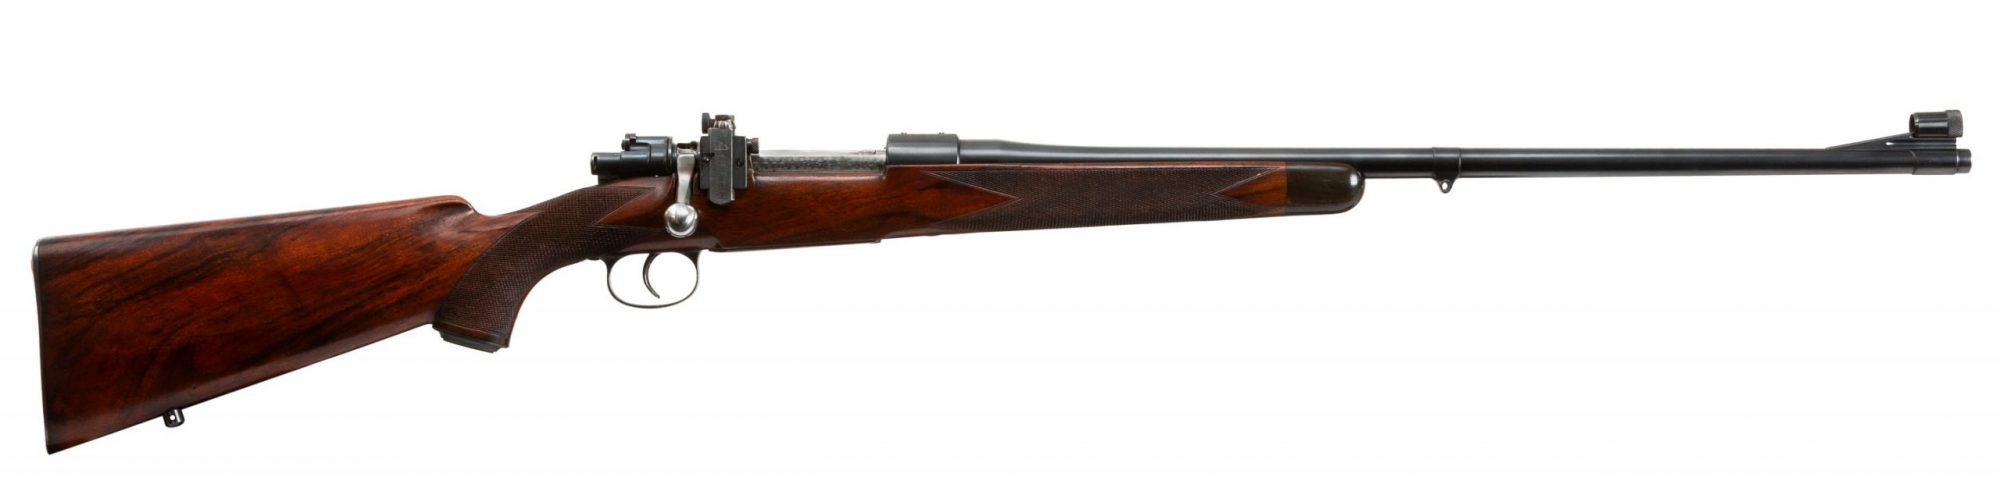 Photo of a Griffin & Howe Mauser Sporting Rifle in .30-06 from 1934